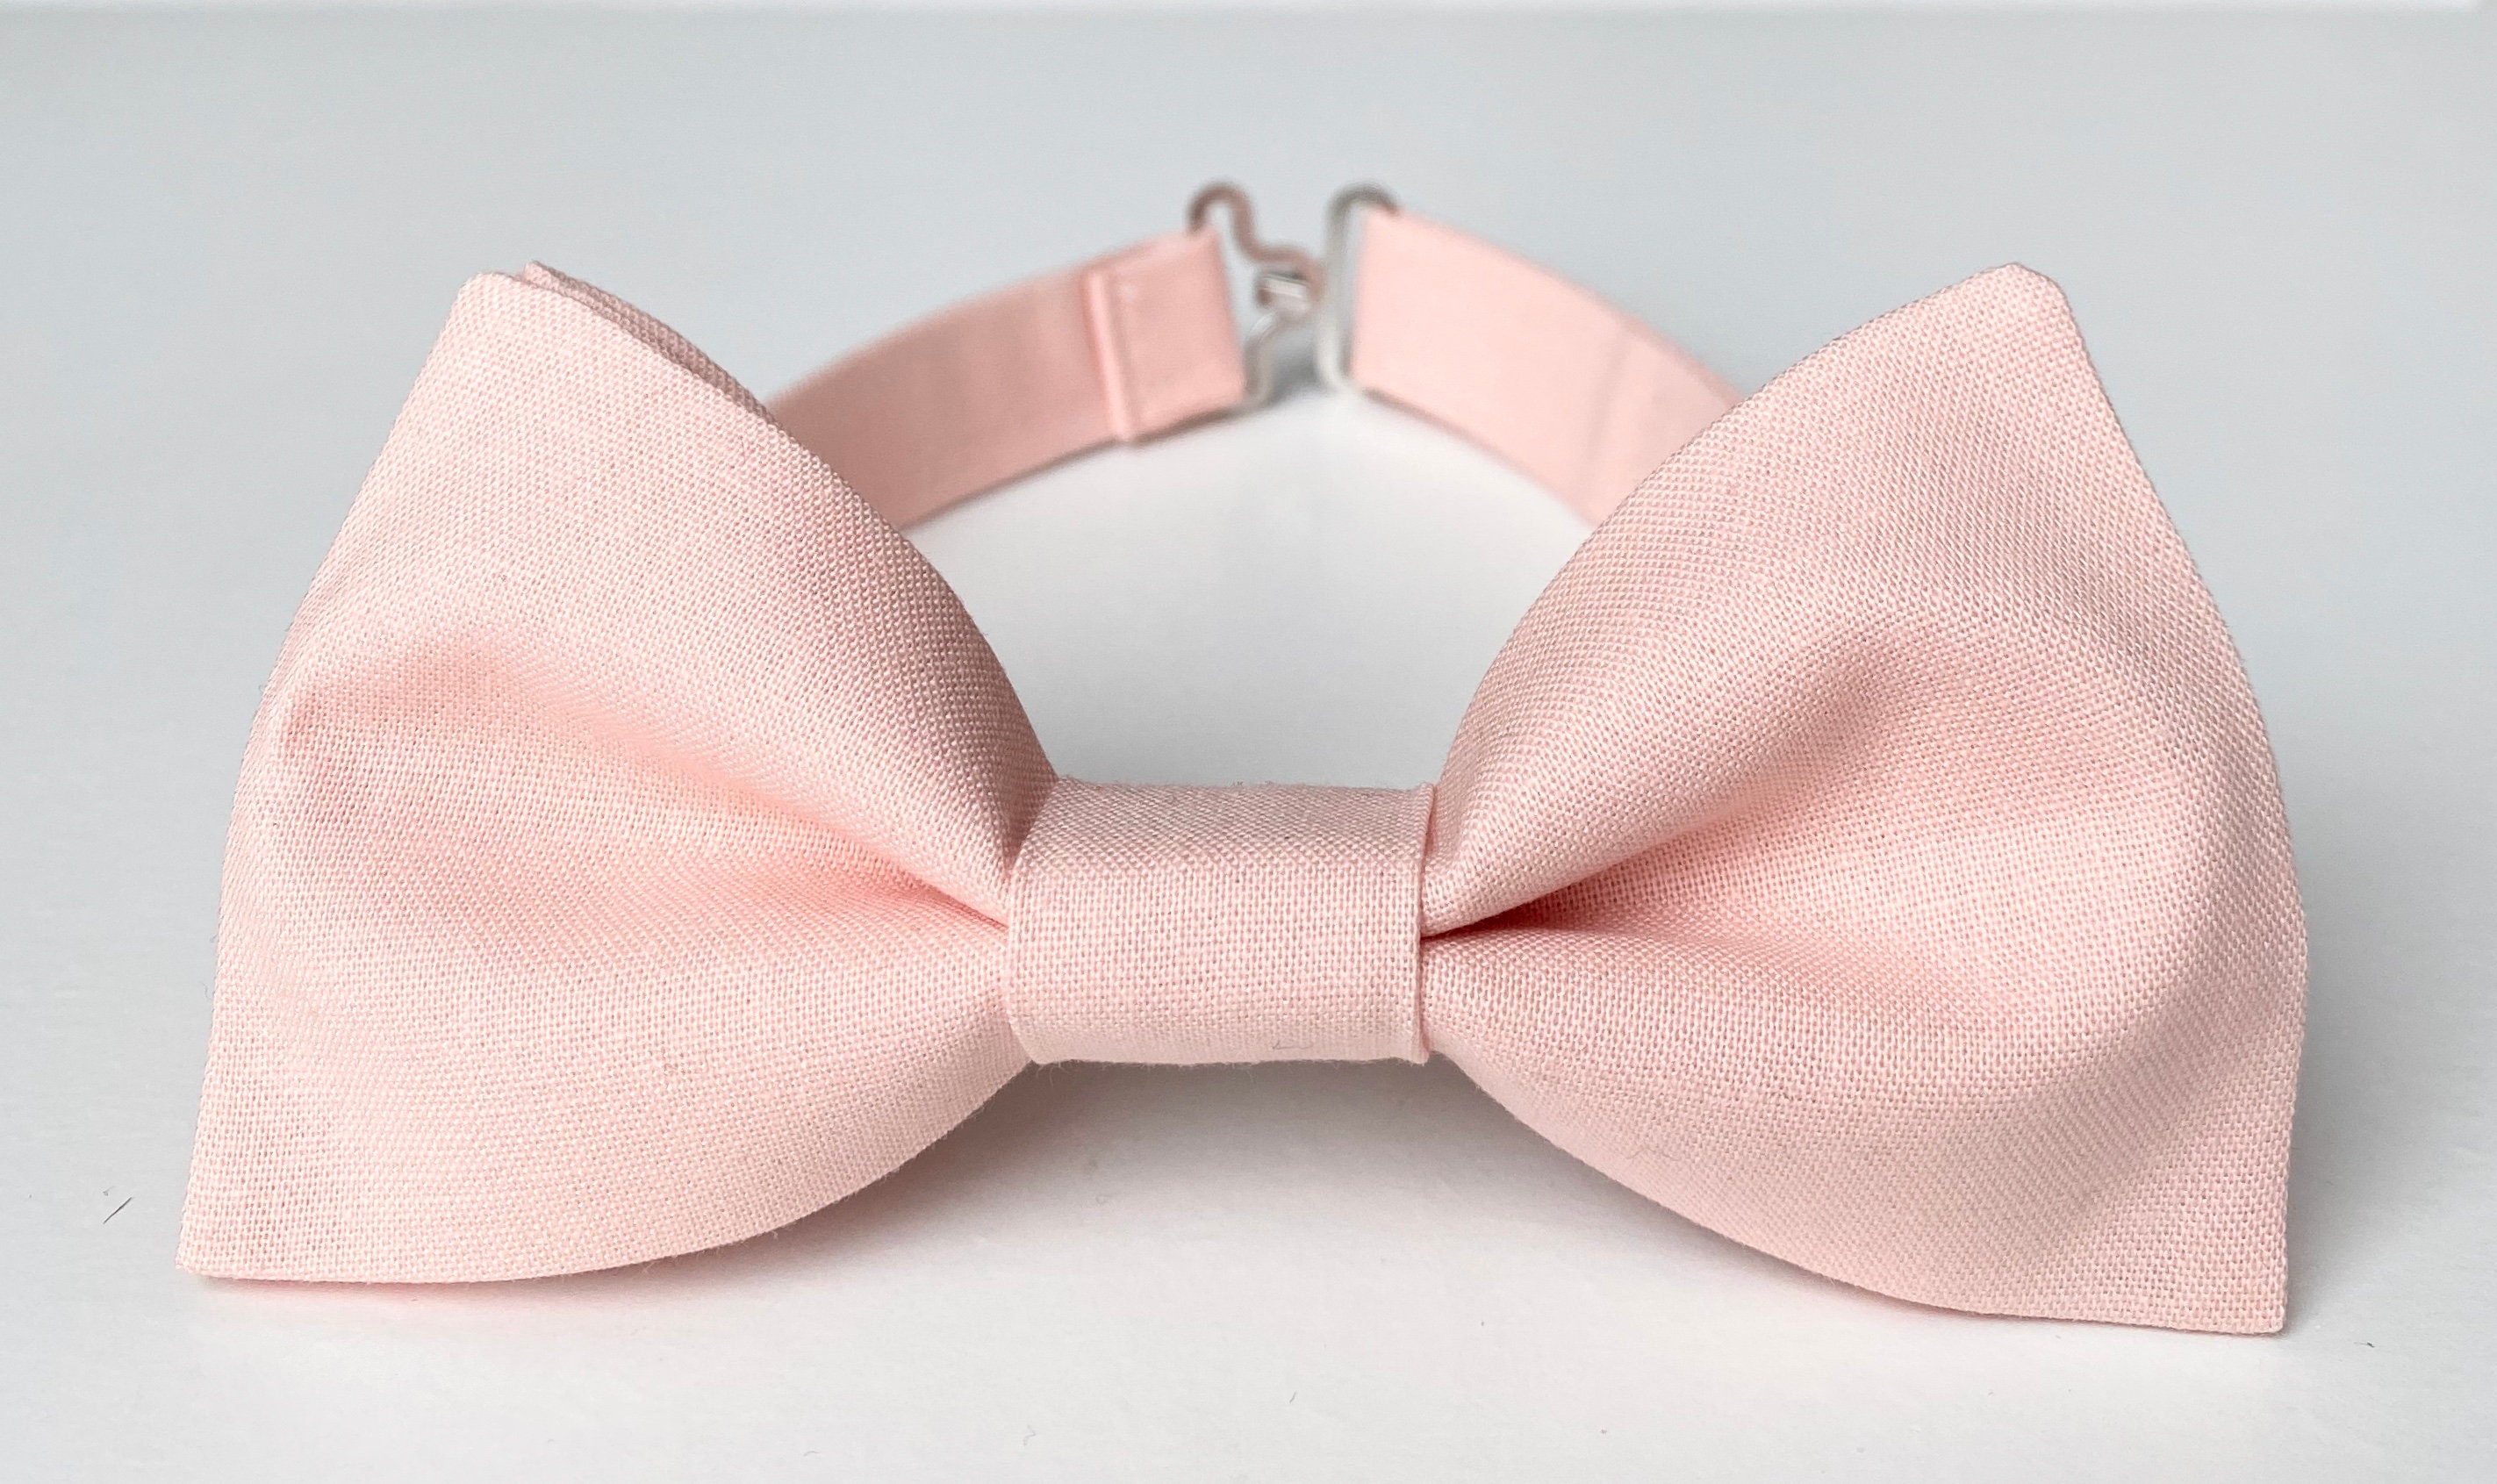 Blush Pink Bow Tie Mens-Kids-Boys-Baby Bow Ties Light Pink | Etsy